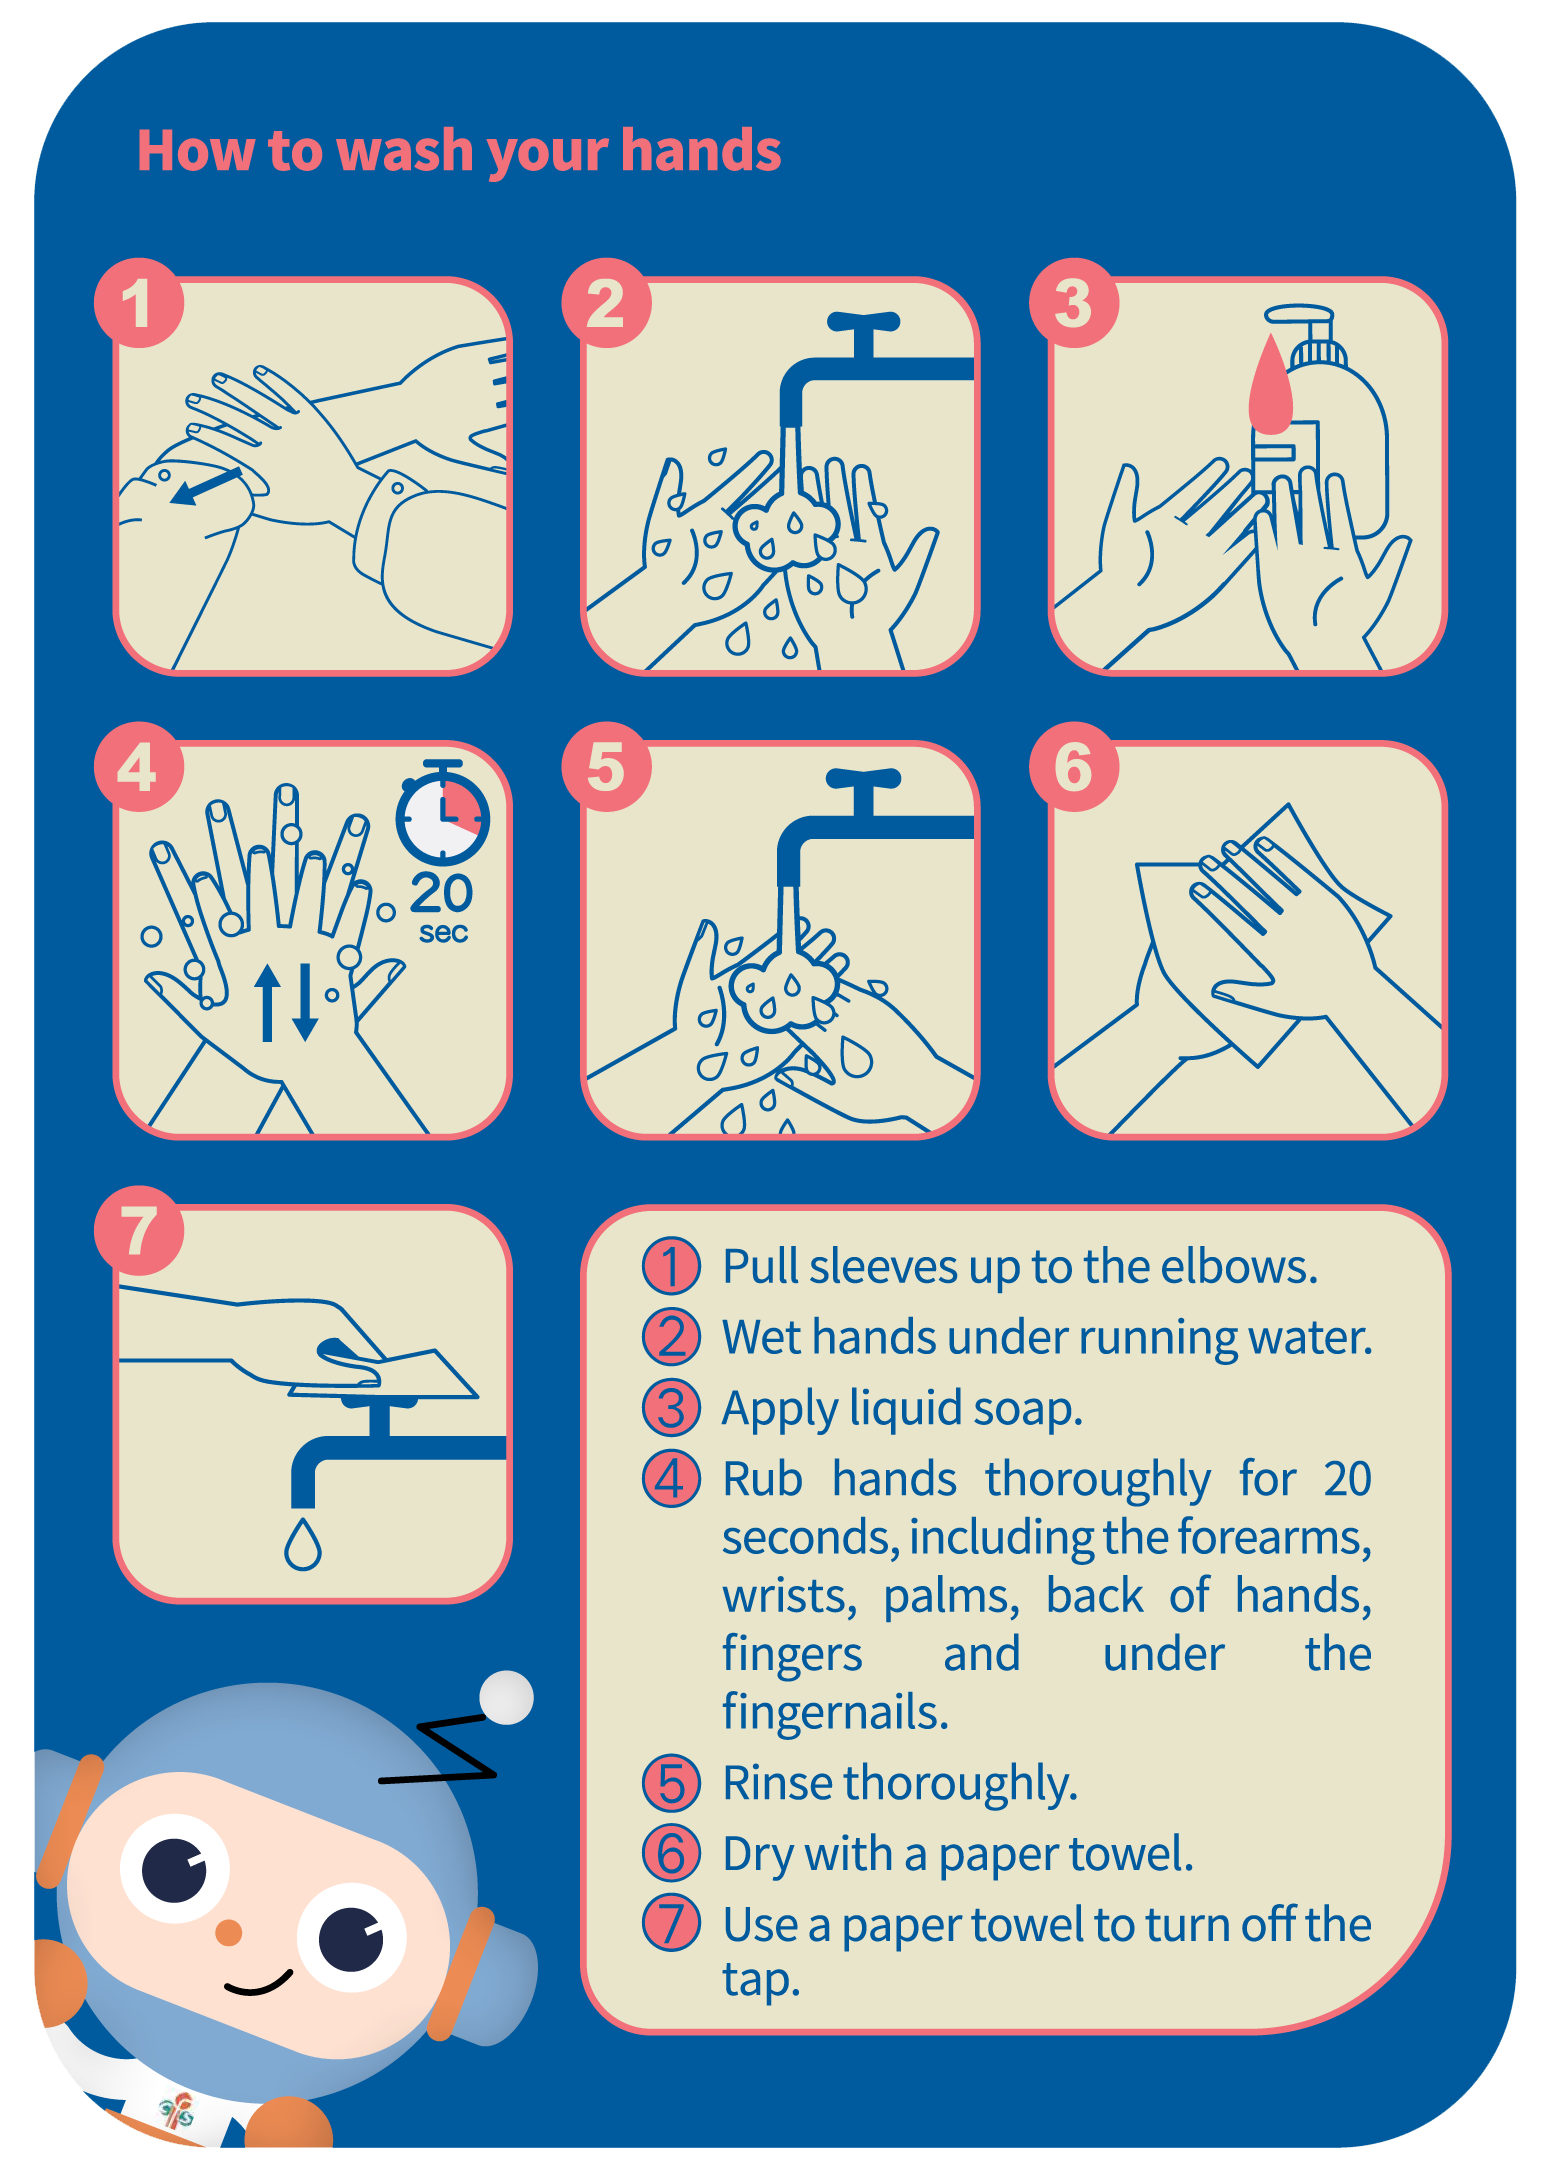 The five steps to proper hand washing